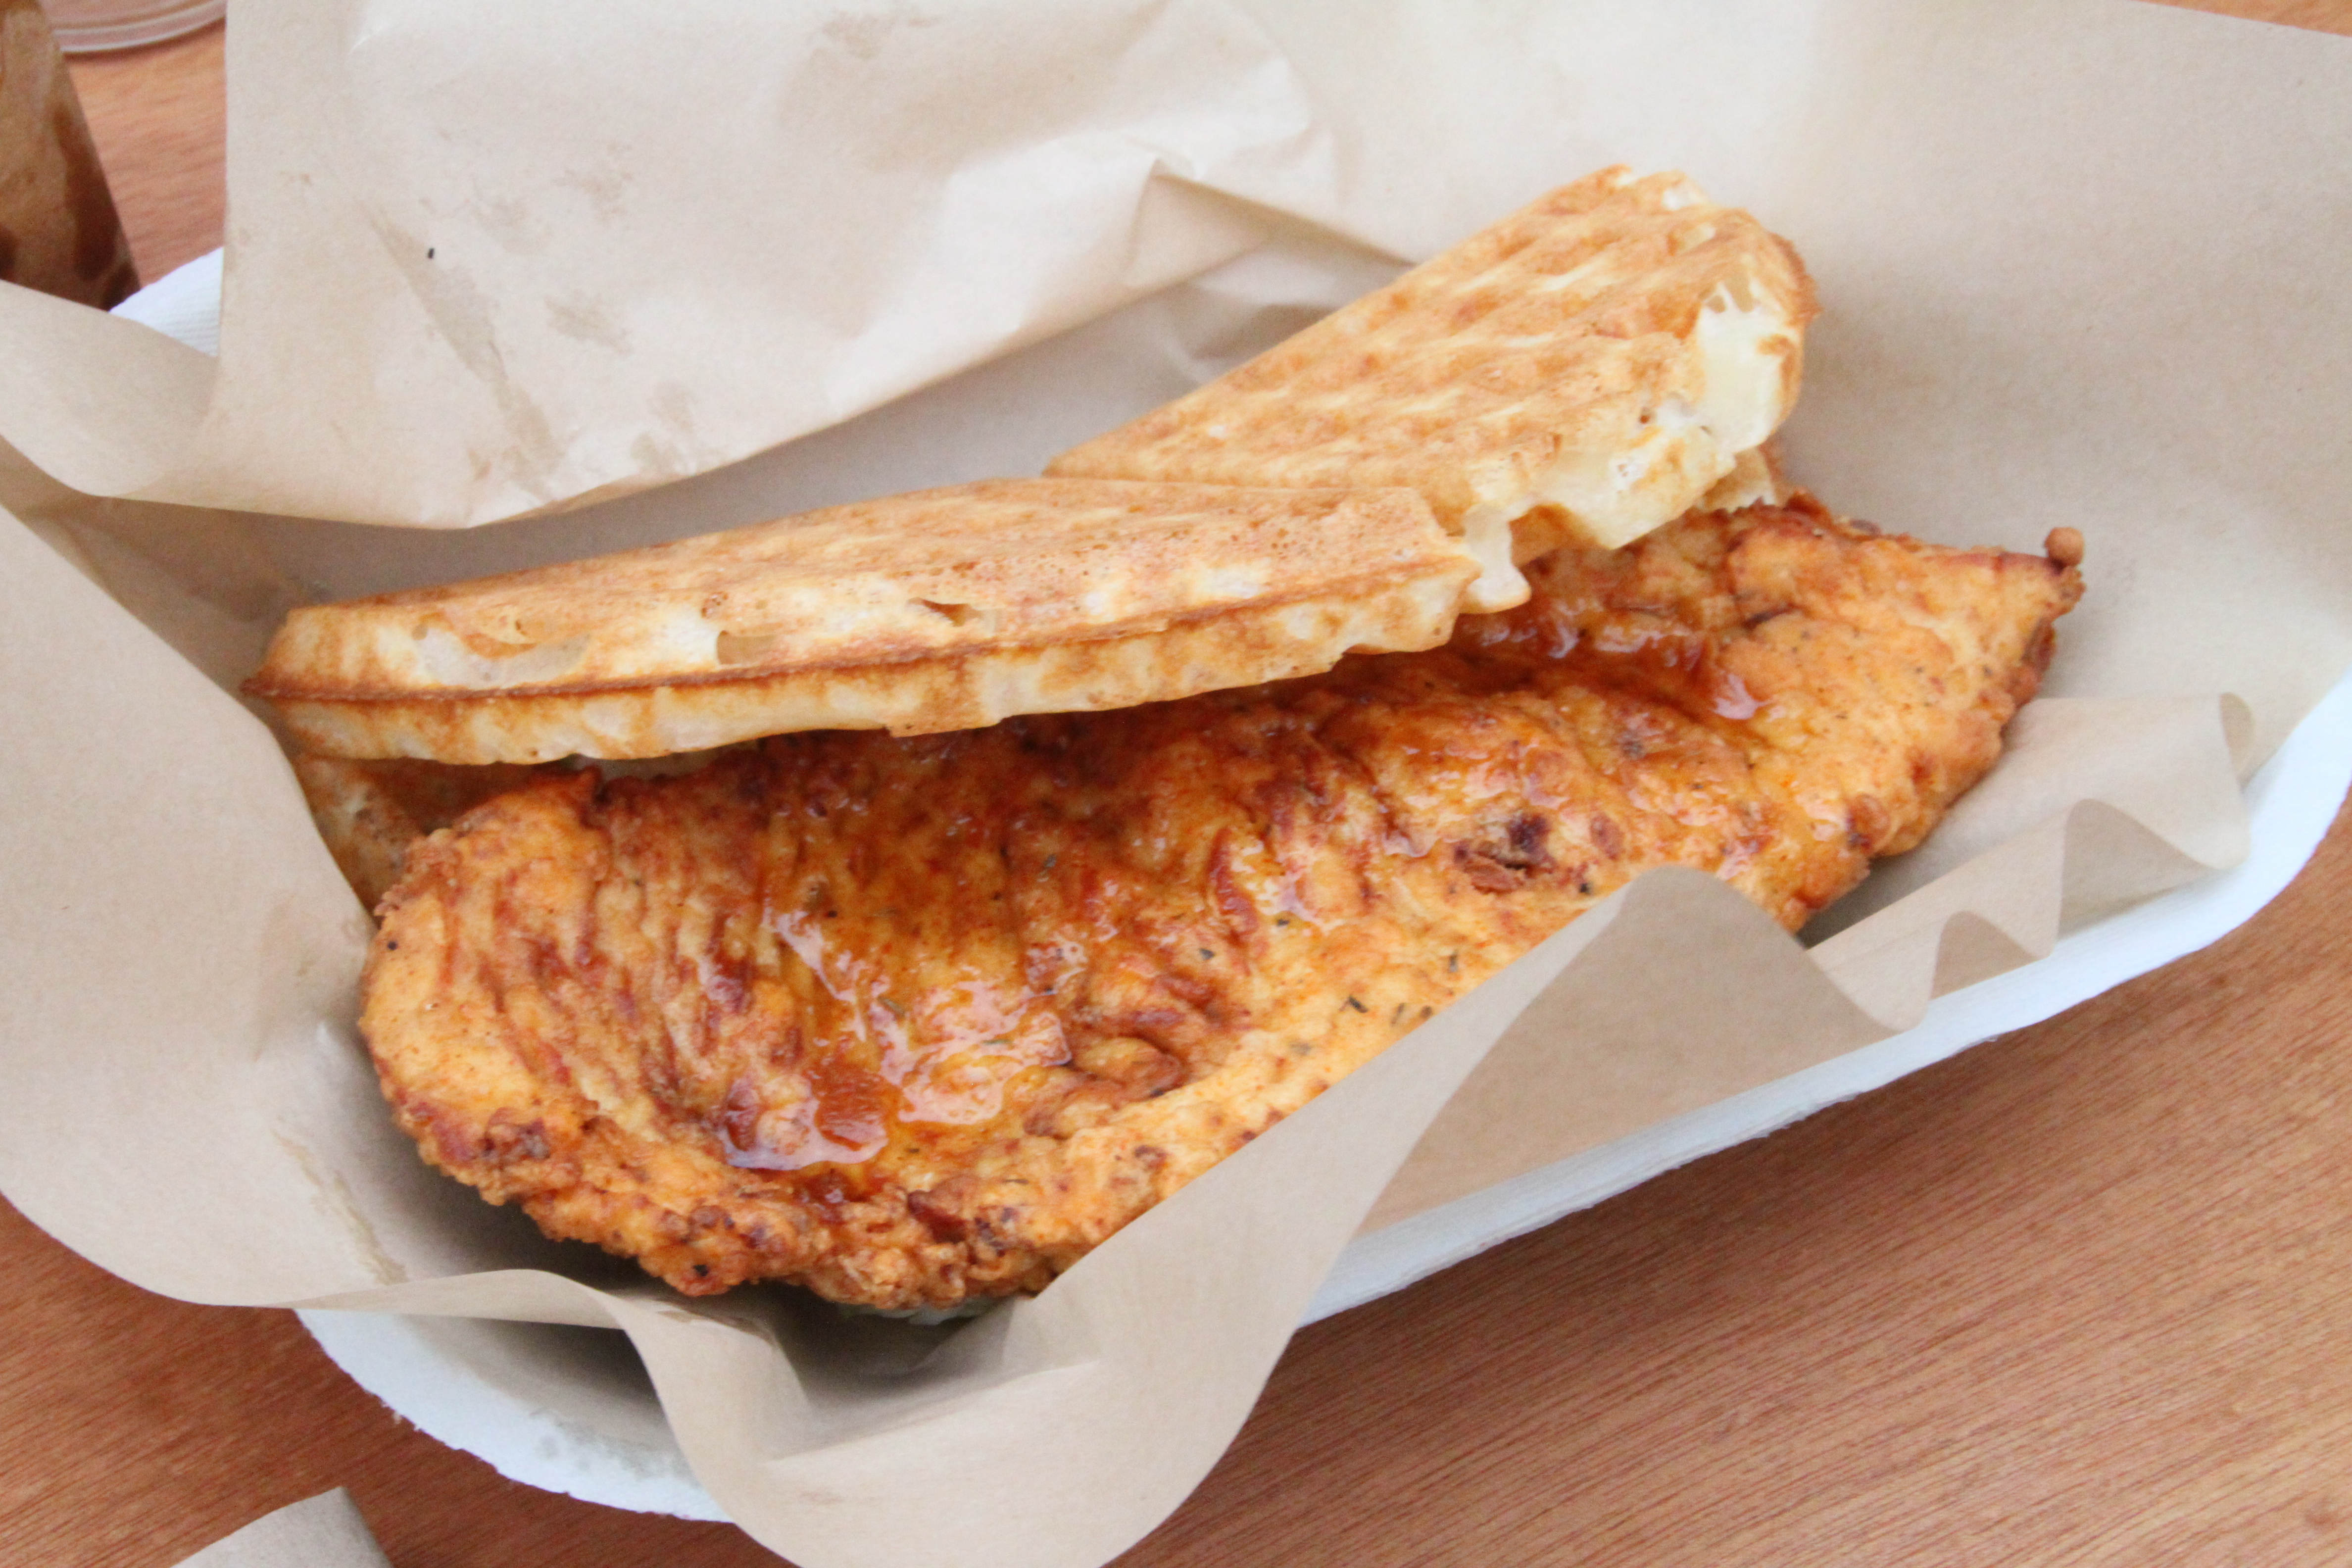 Bruxie's Chicken and waffles